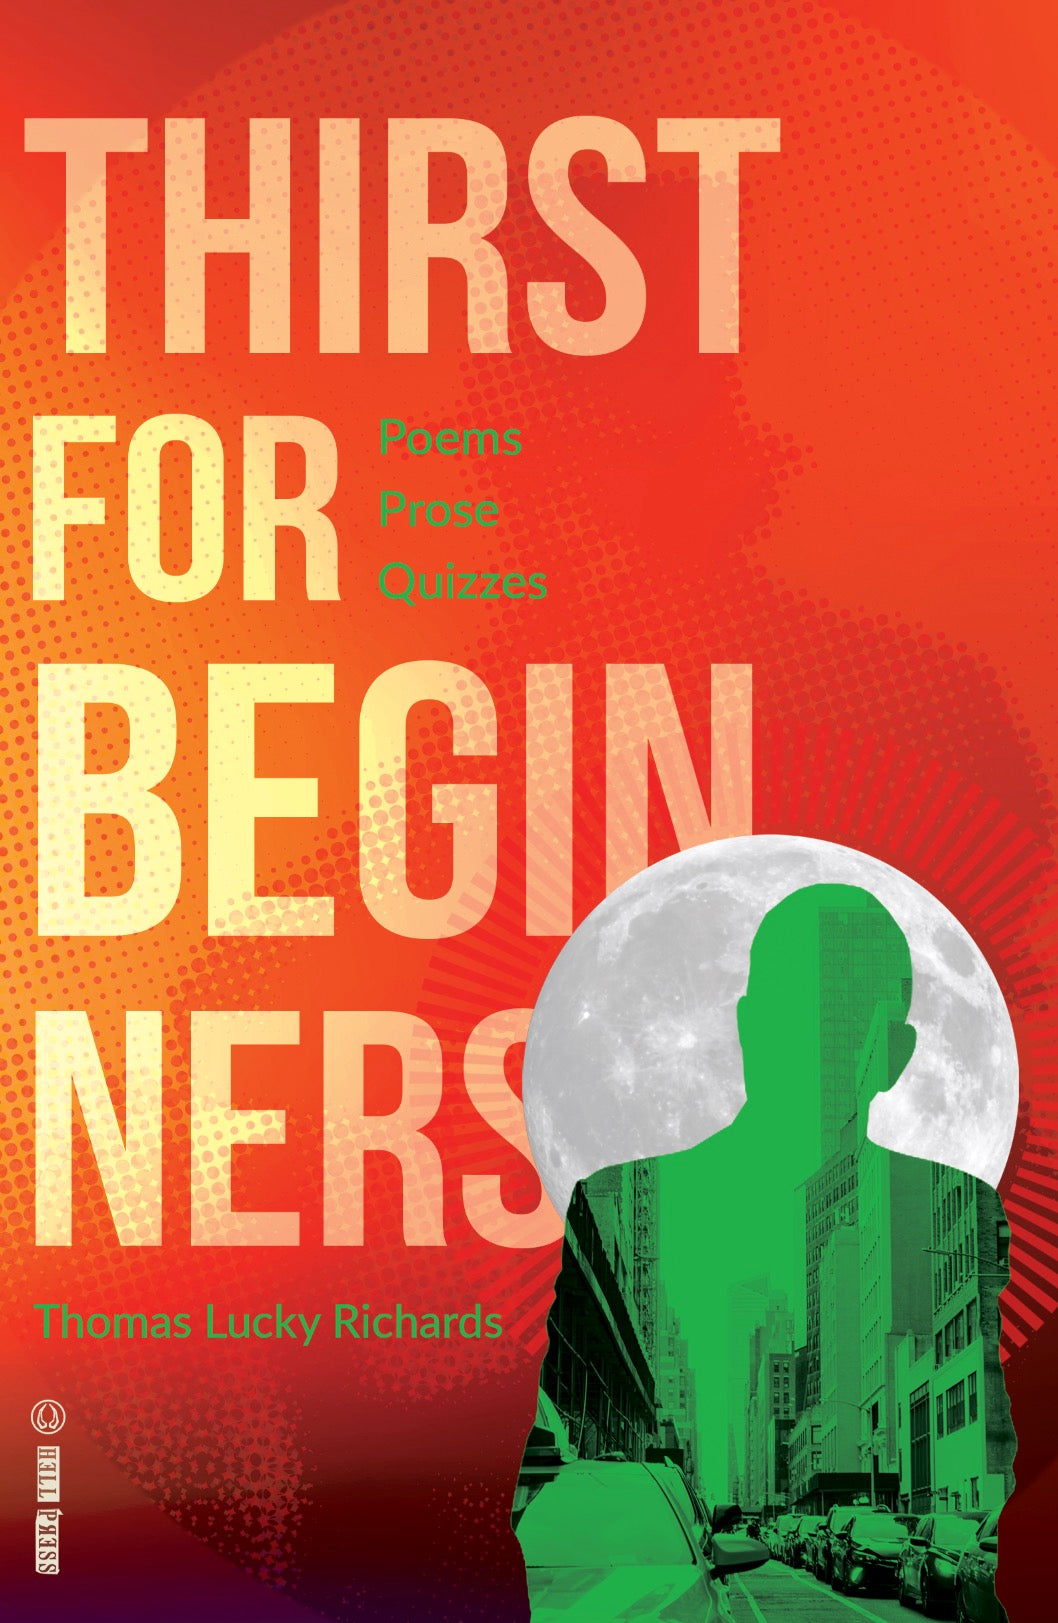 Thirst for Beginners: Poems, Prose, and Quizzes by Thomas Lucky Richards